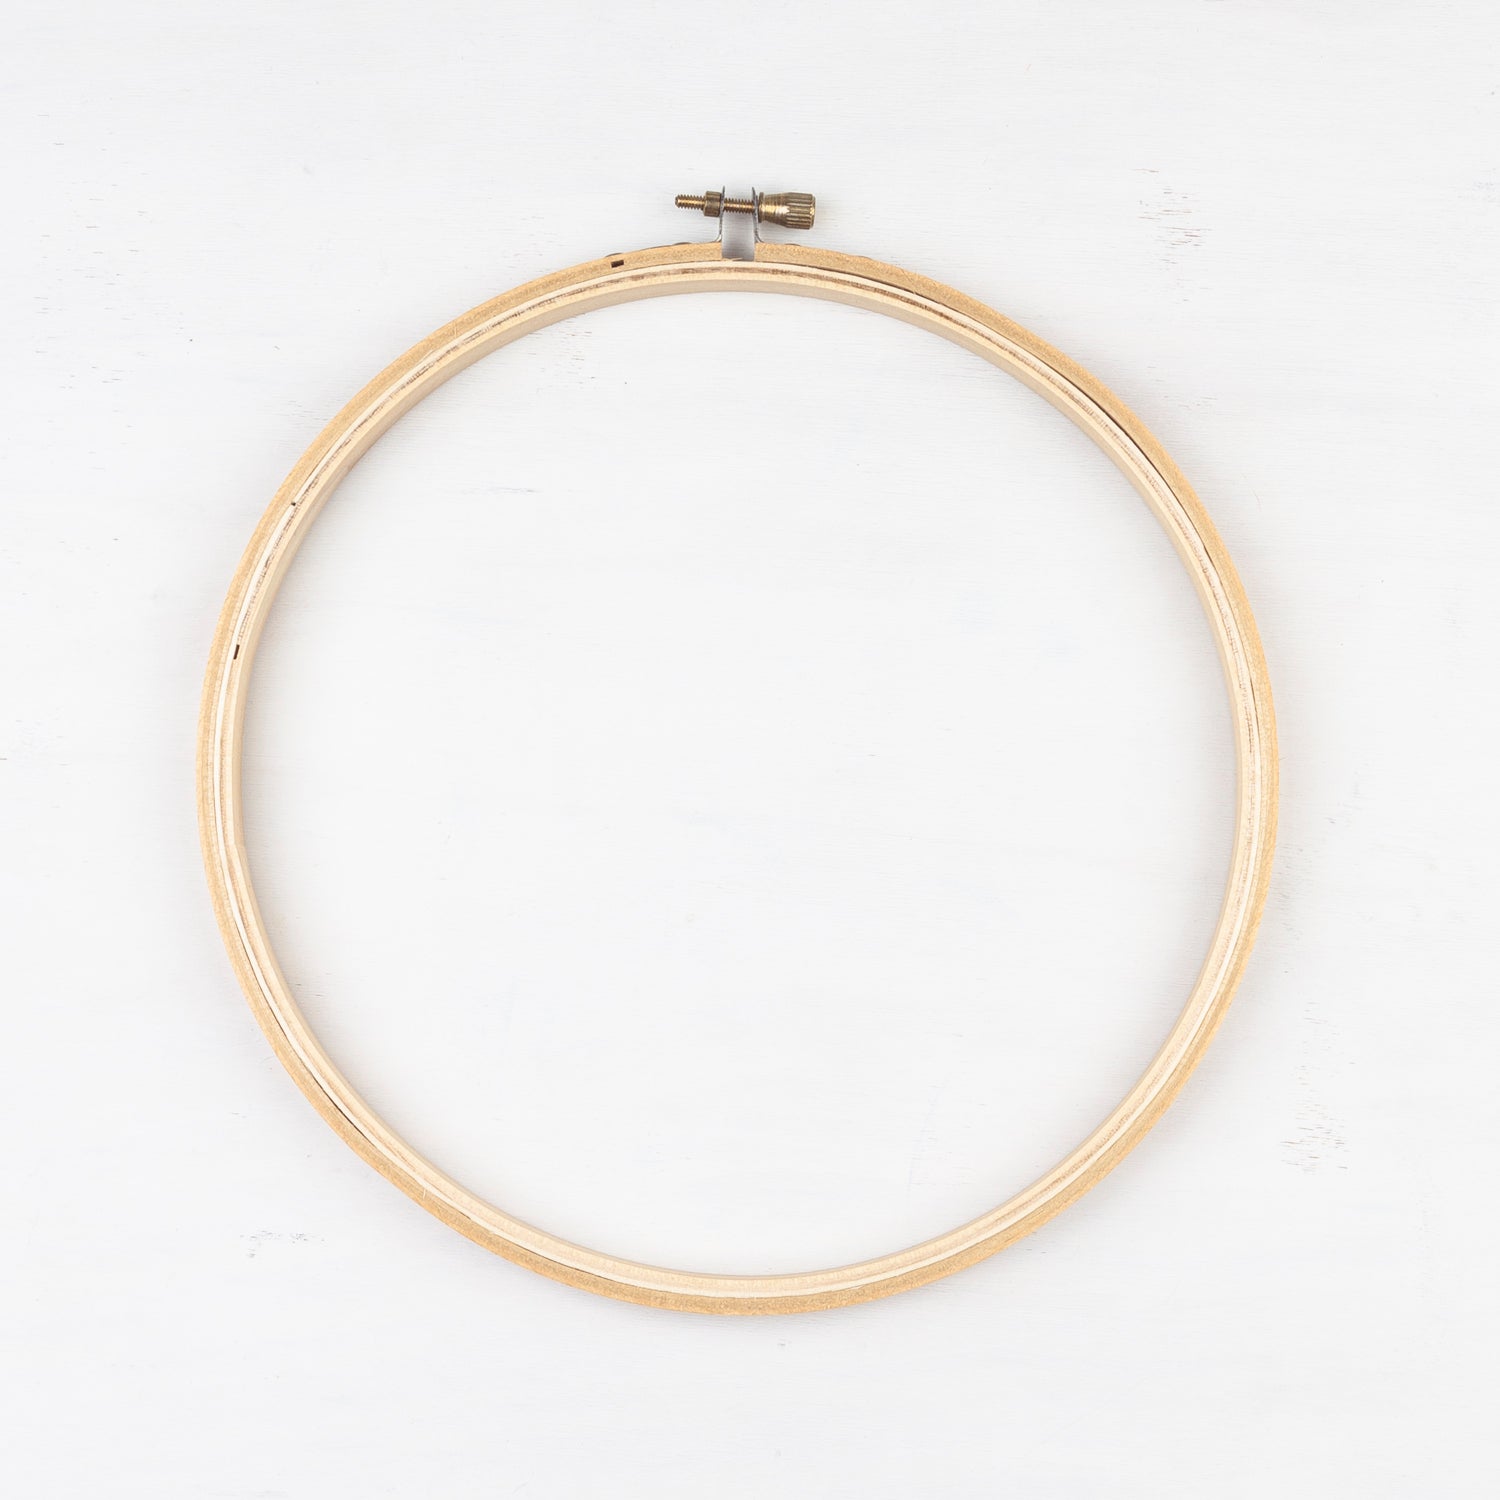 Embroidery Hoop (8 inch)